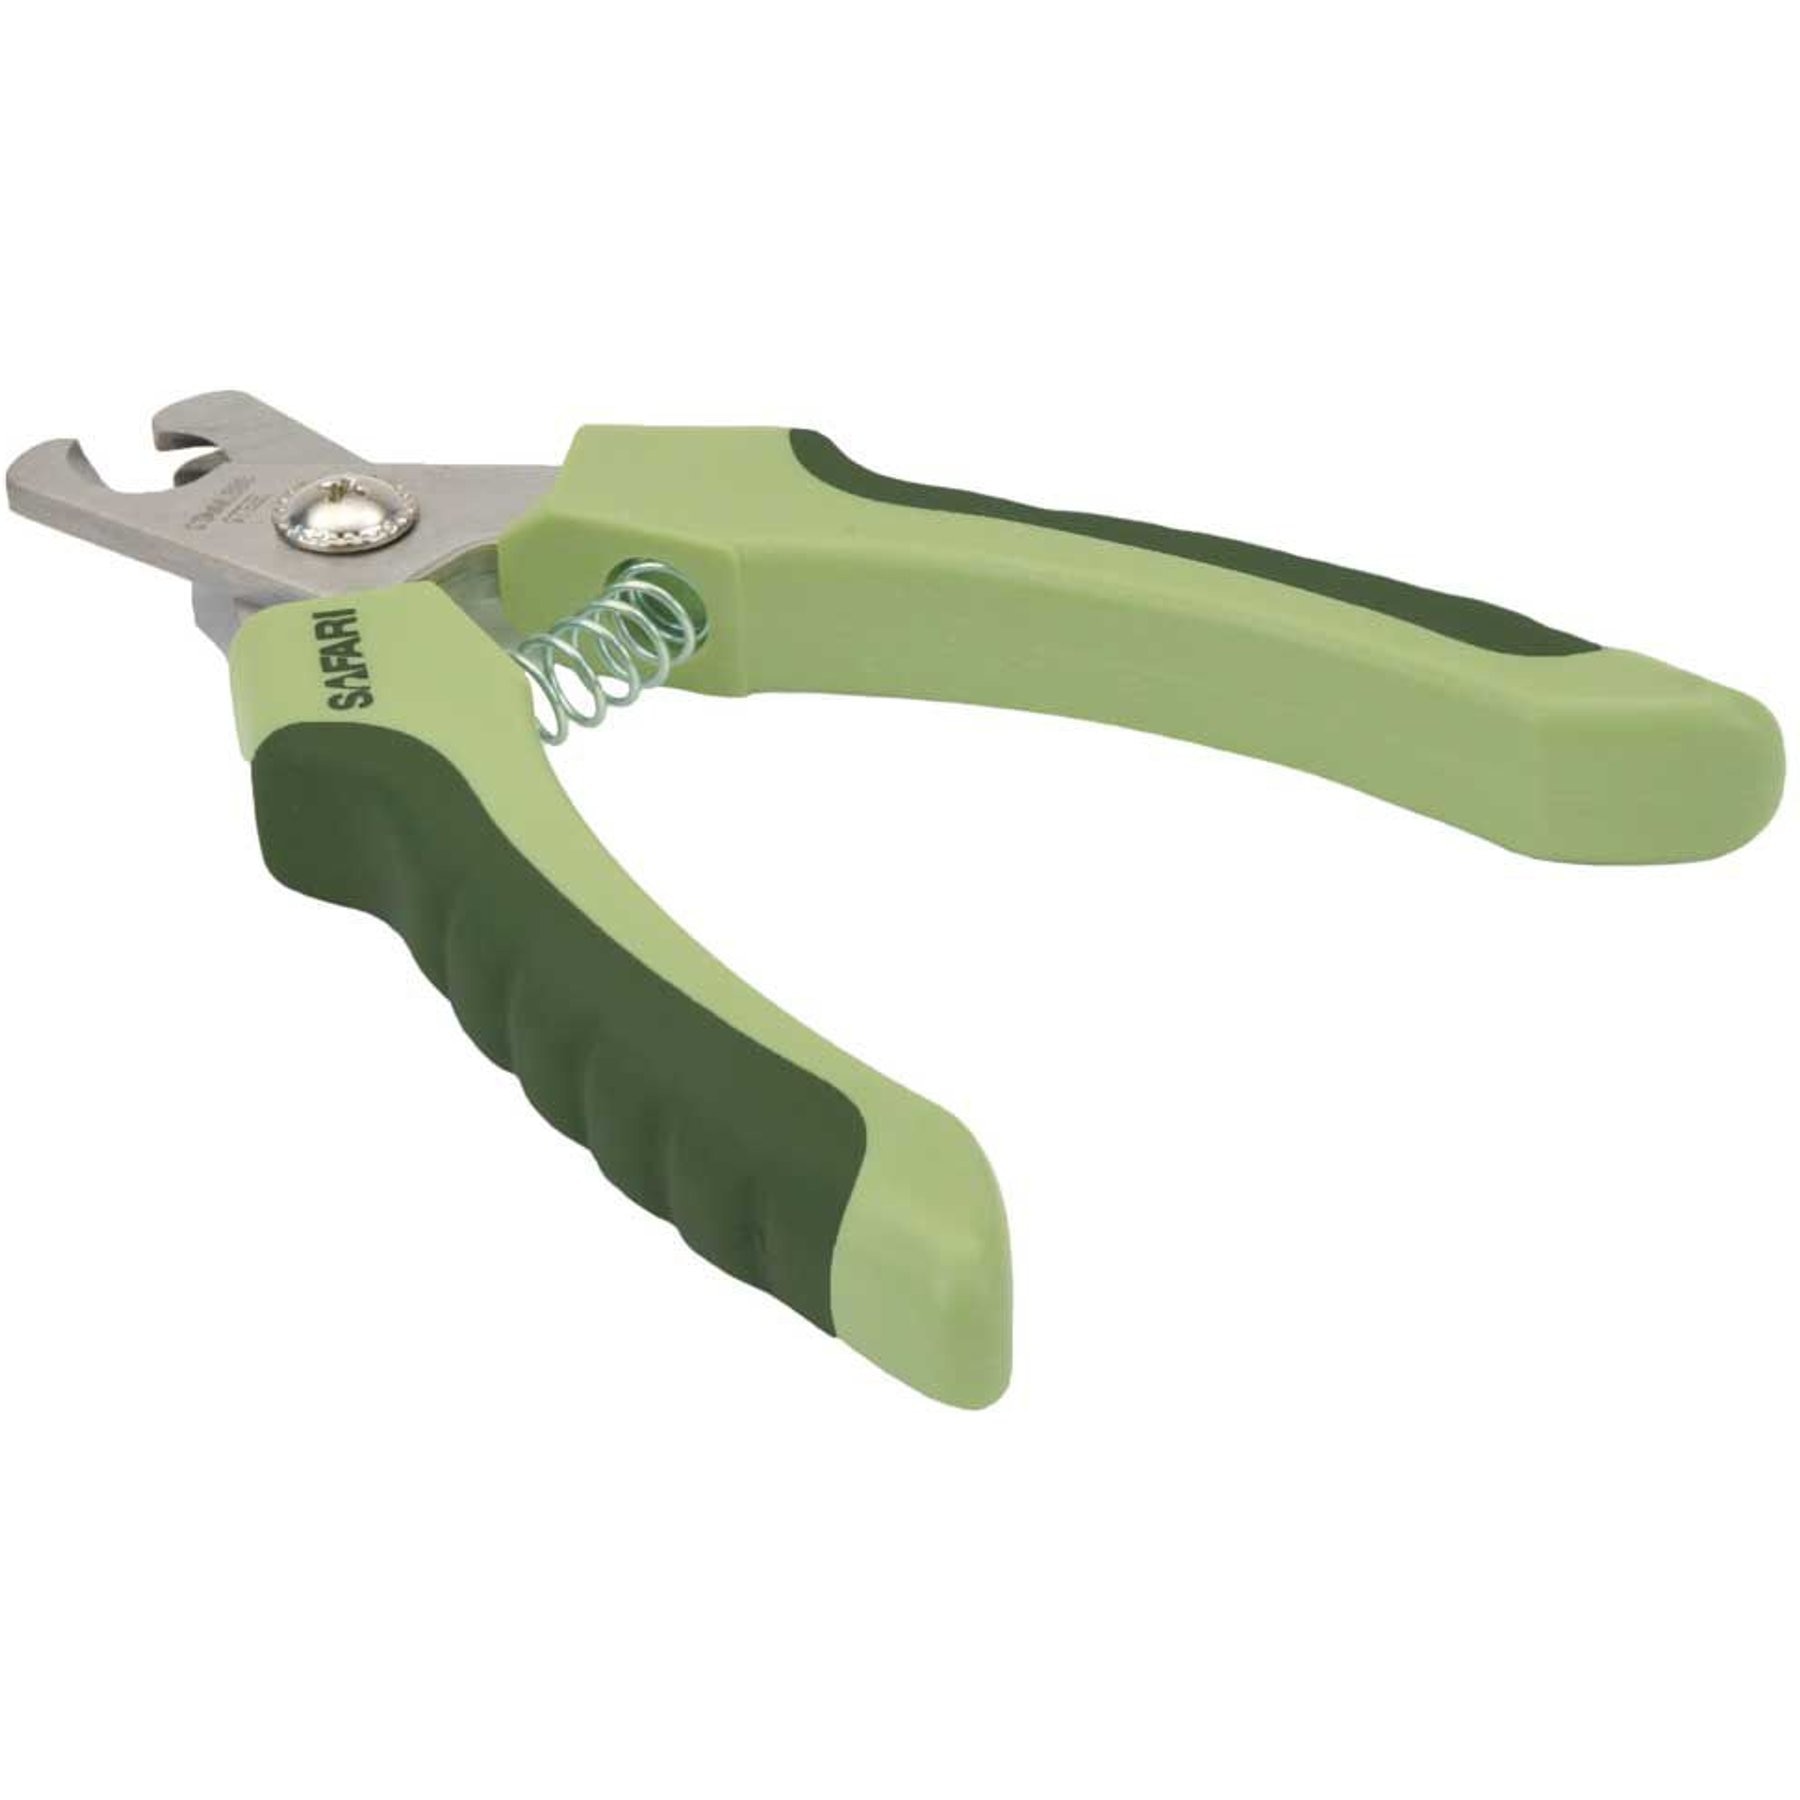 Dog Nail Clippers with Safety Guard - Superior Sharpness - Veterinarian  Designed - Suitable for Large Dogs - Stainless Steel Dog Nail Trimmers -  Walmart.com